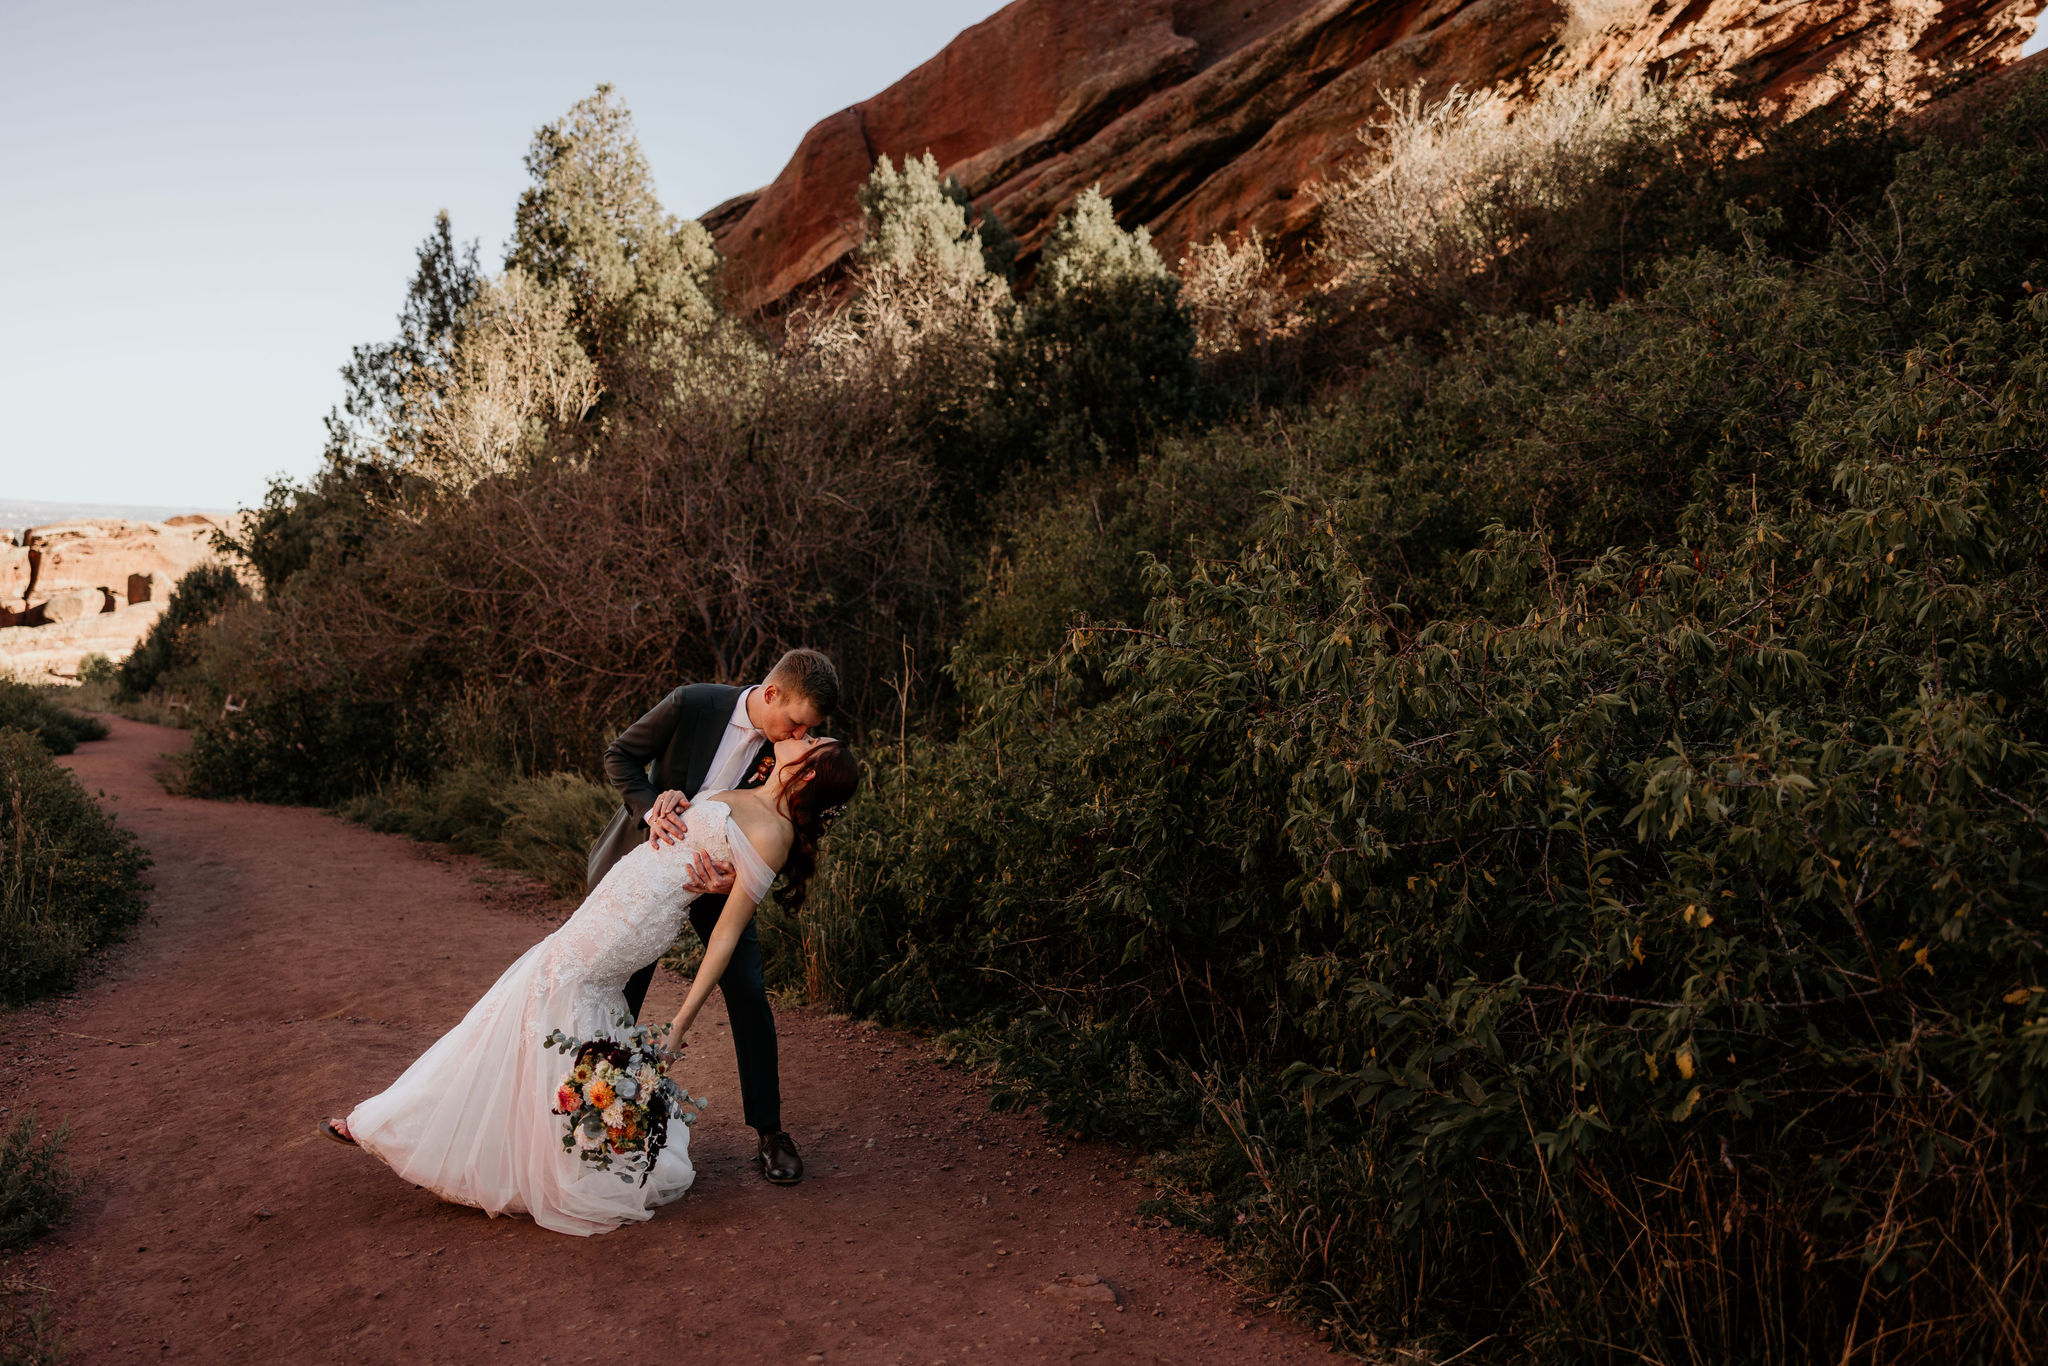 groom dips bride during wedding photos at red rocks park and amphitheatre.